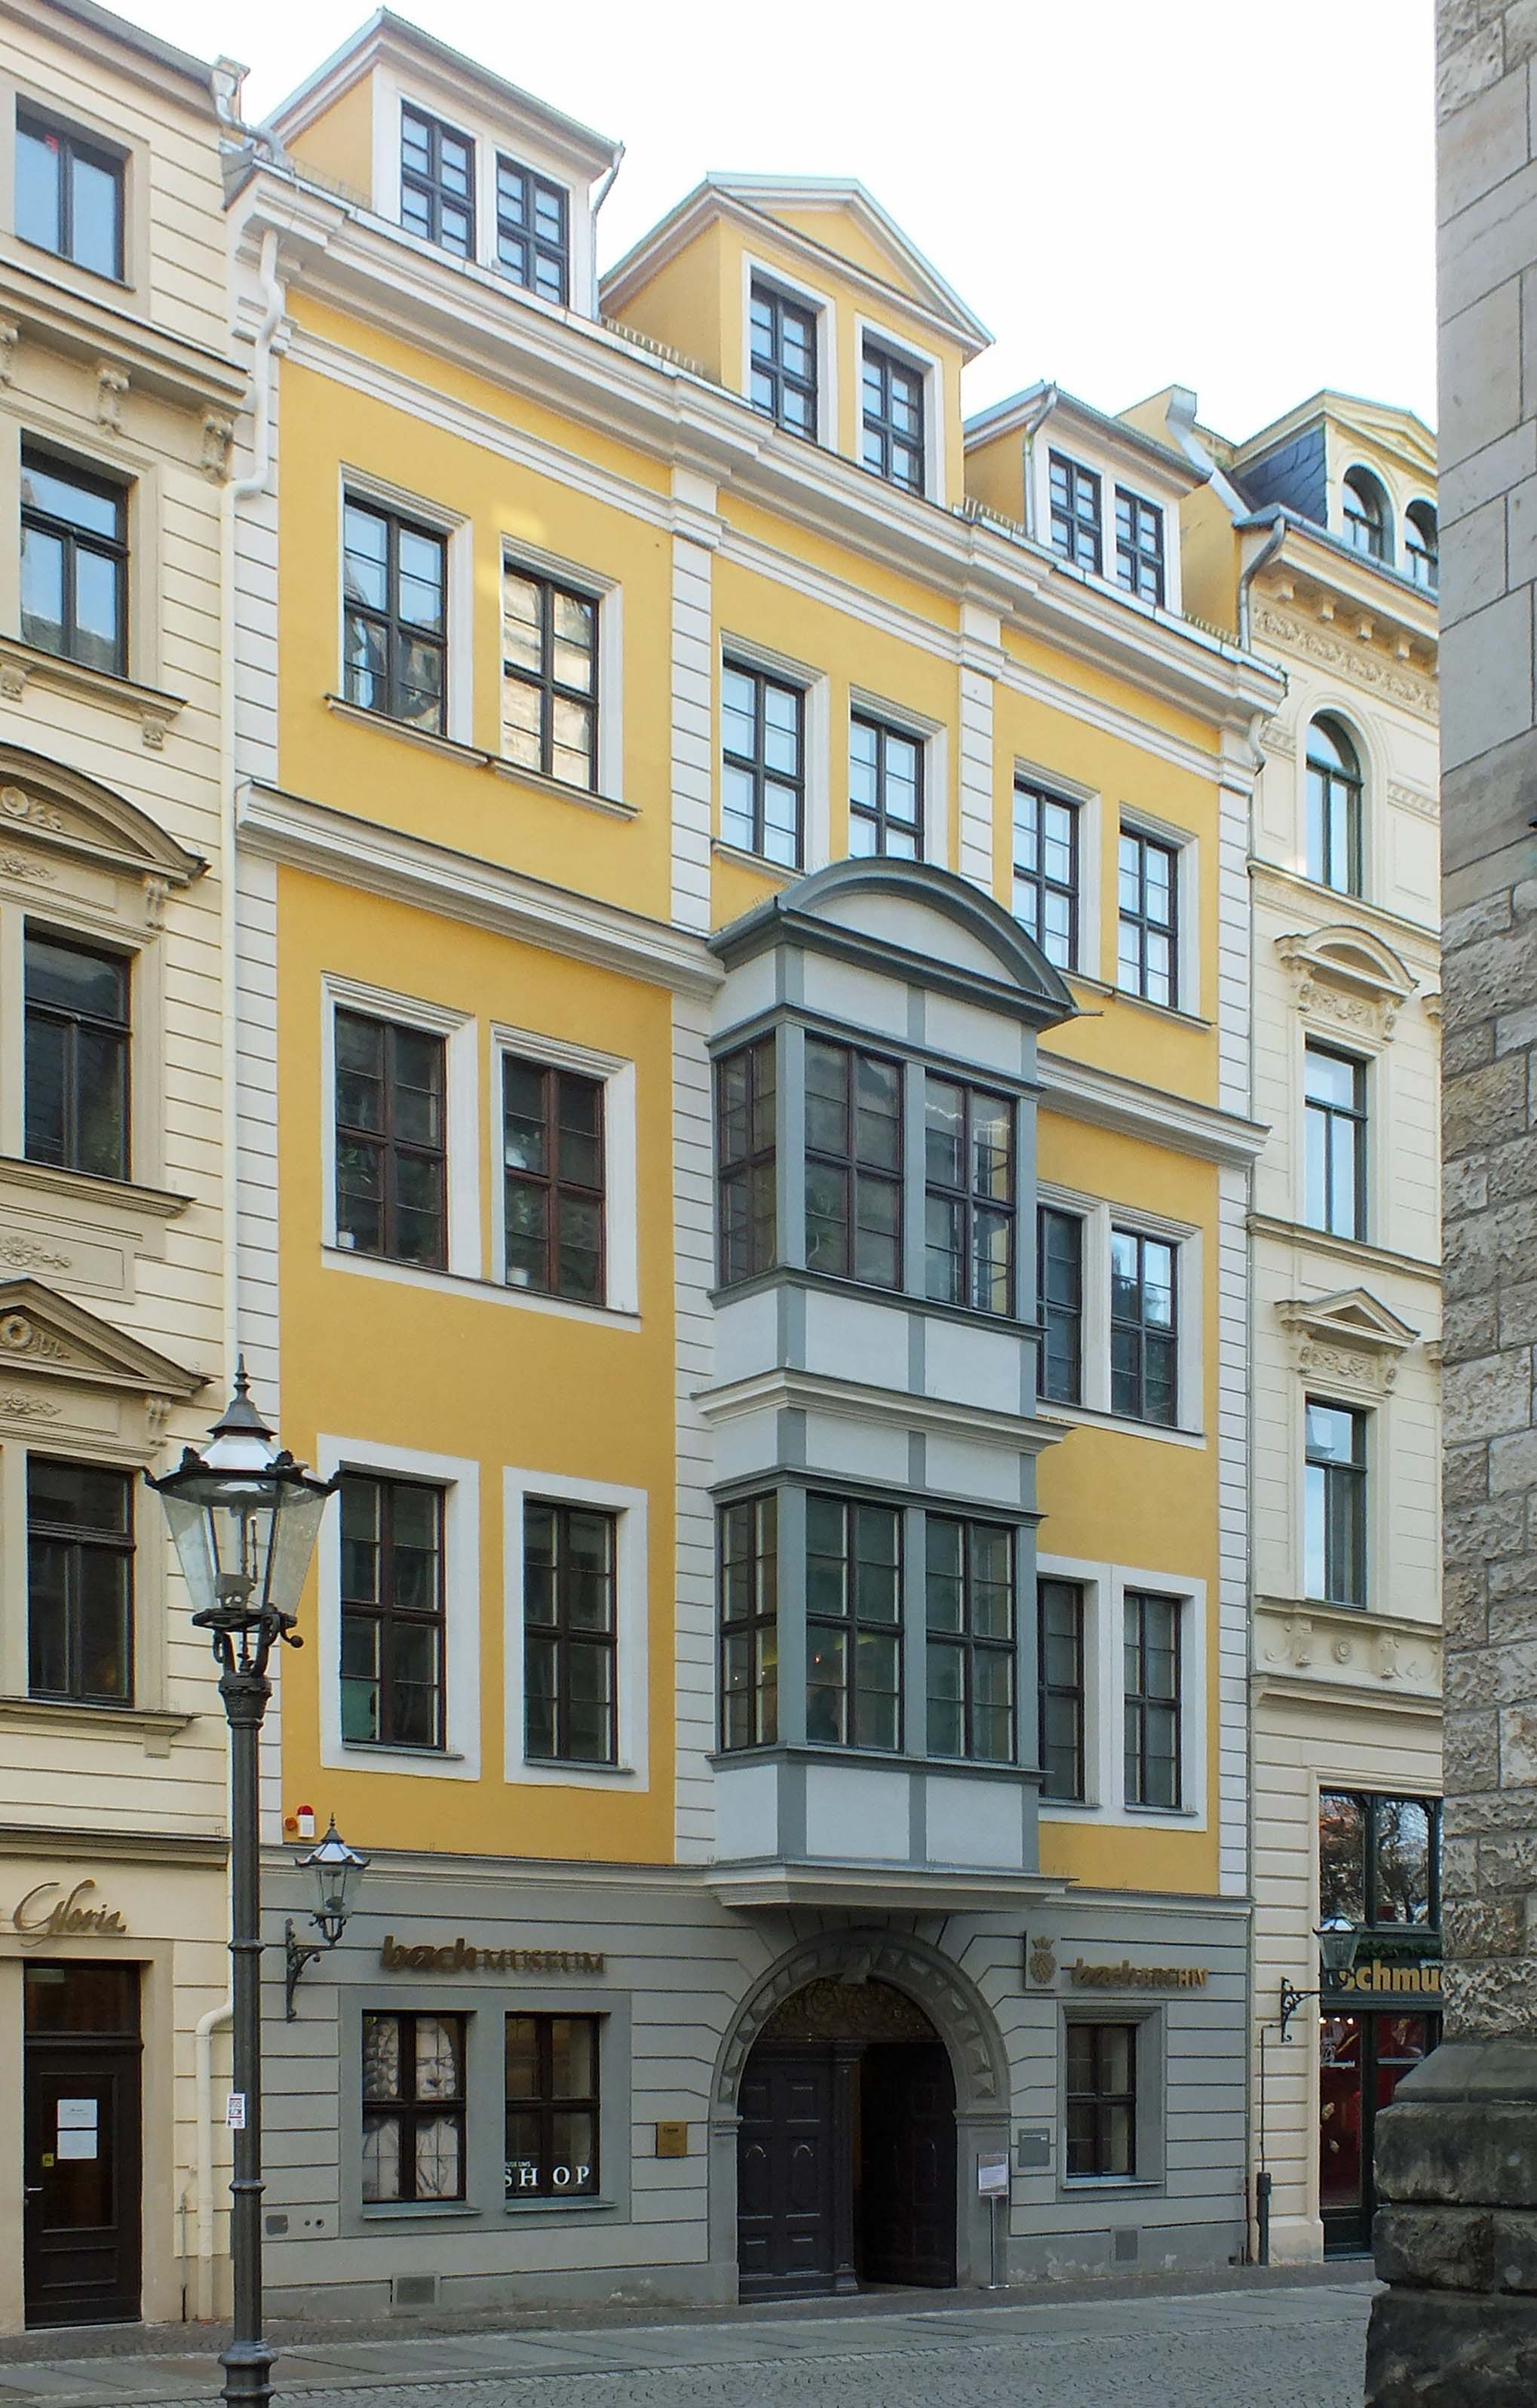 A view of the Bosehaus in Leipzig, residence of the Neue Bach Gesellschaft and the Bach Archiv Leipzig. The building itself was known to Bach. The Bosehaus was restored from 2008 to 2010 to comply with the latest safety requirements for archives, and was opened again on 20 March 2010.